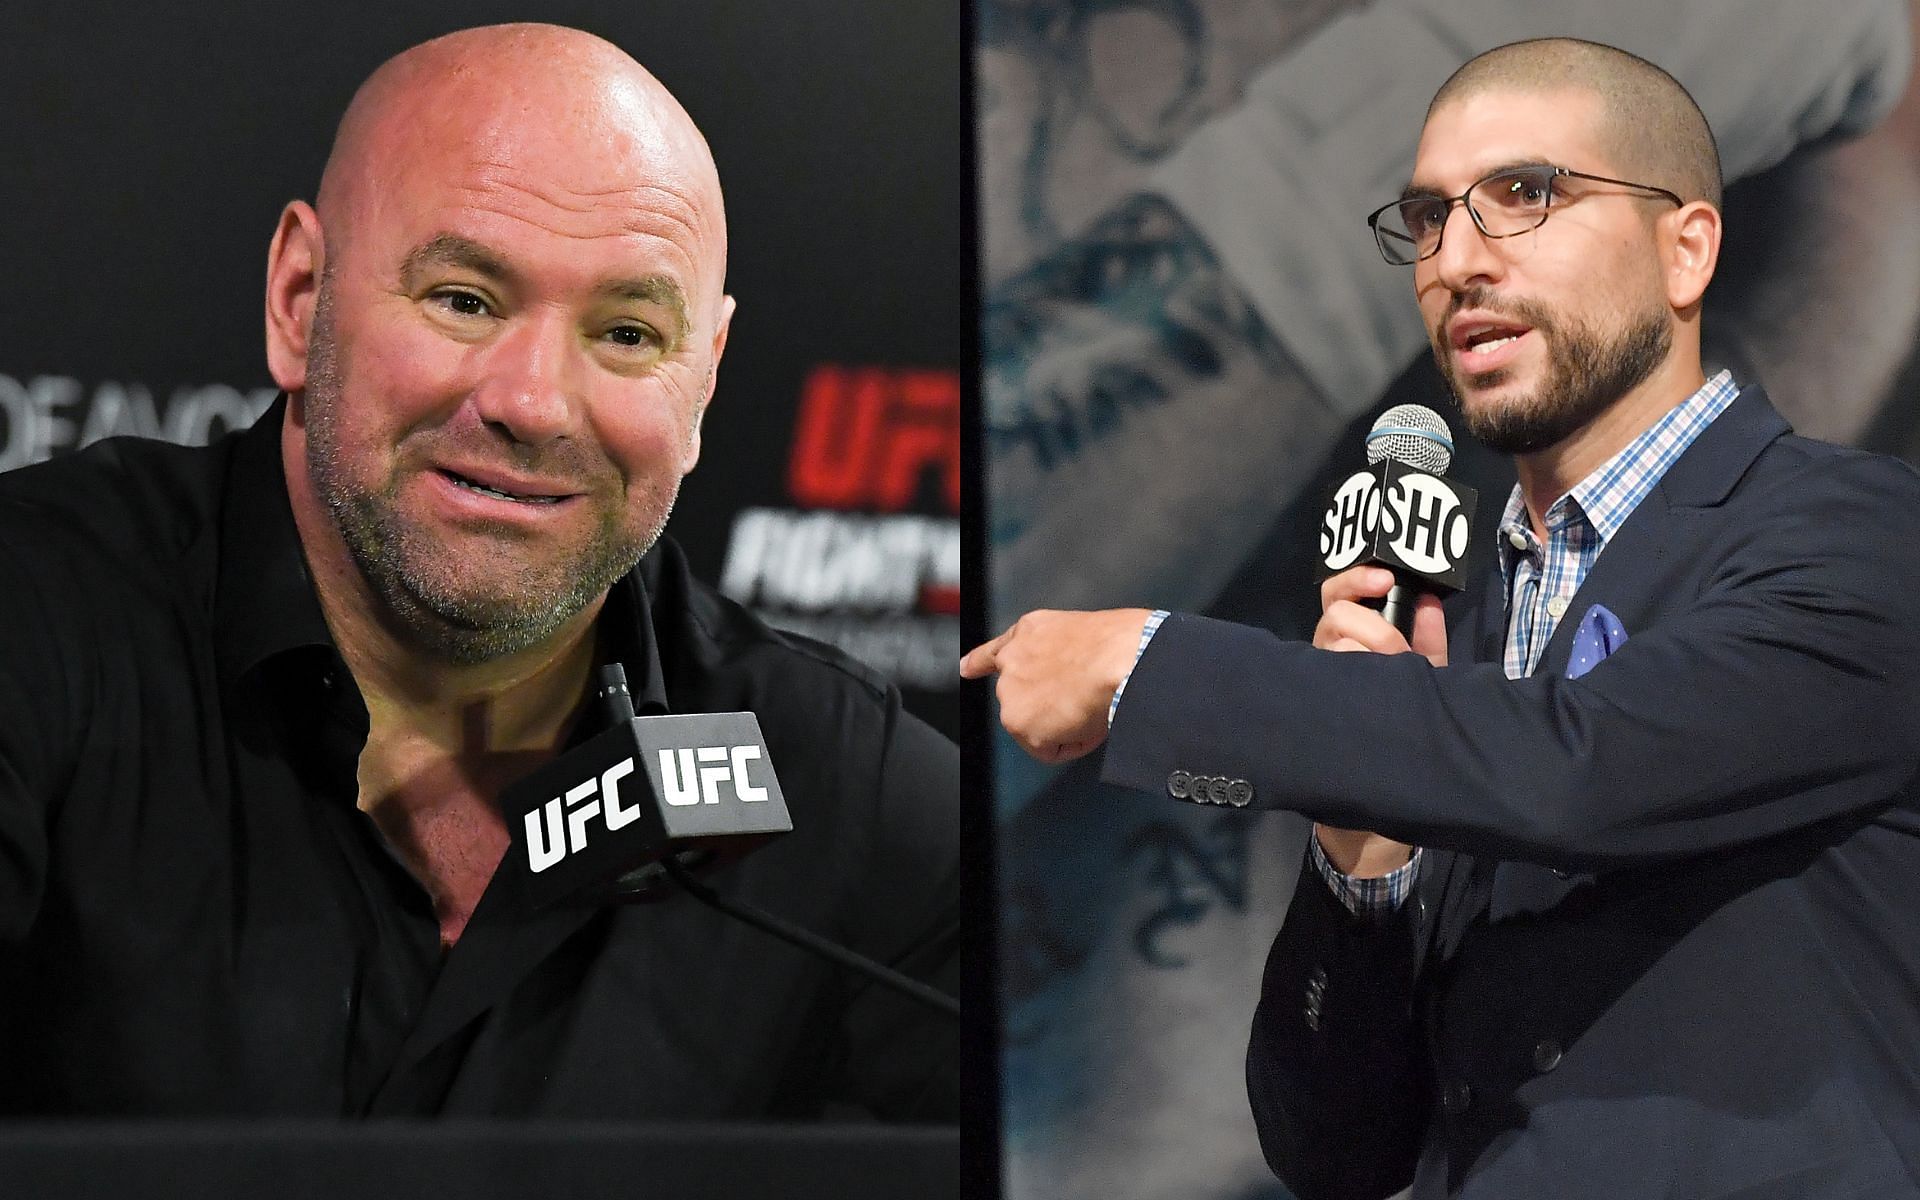 Dana White (left) and Ariel Helwani (right) (Image credits Getty Images)